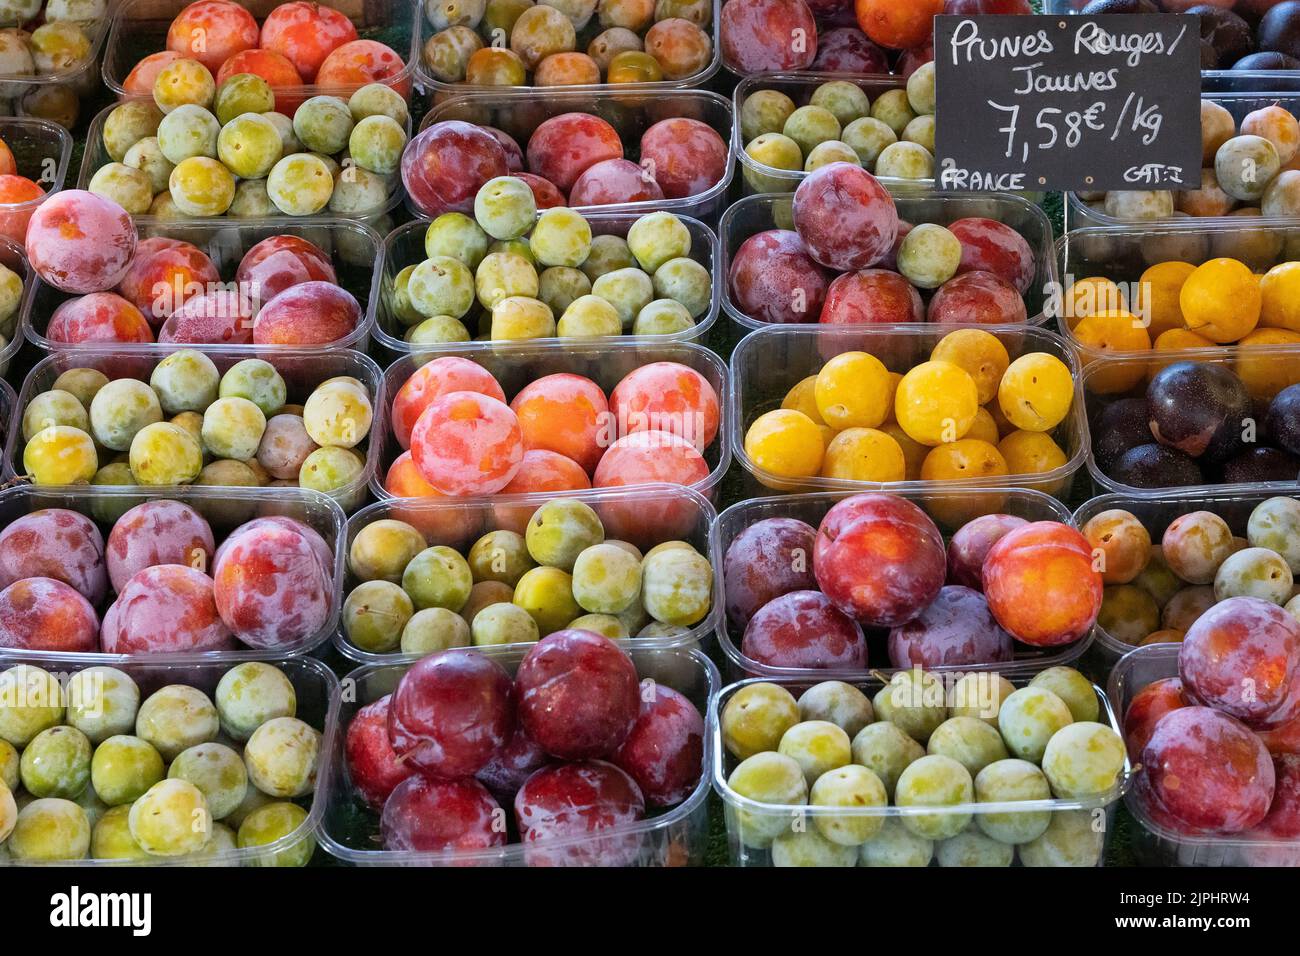 Plums stall in the market of Sanary-sur-mer, France Stock Photo